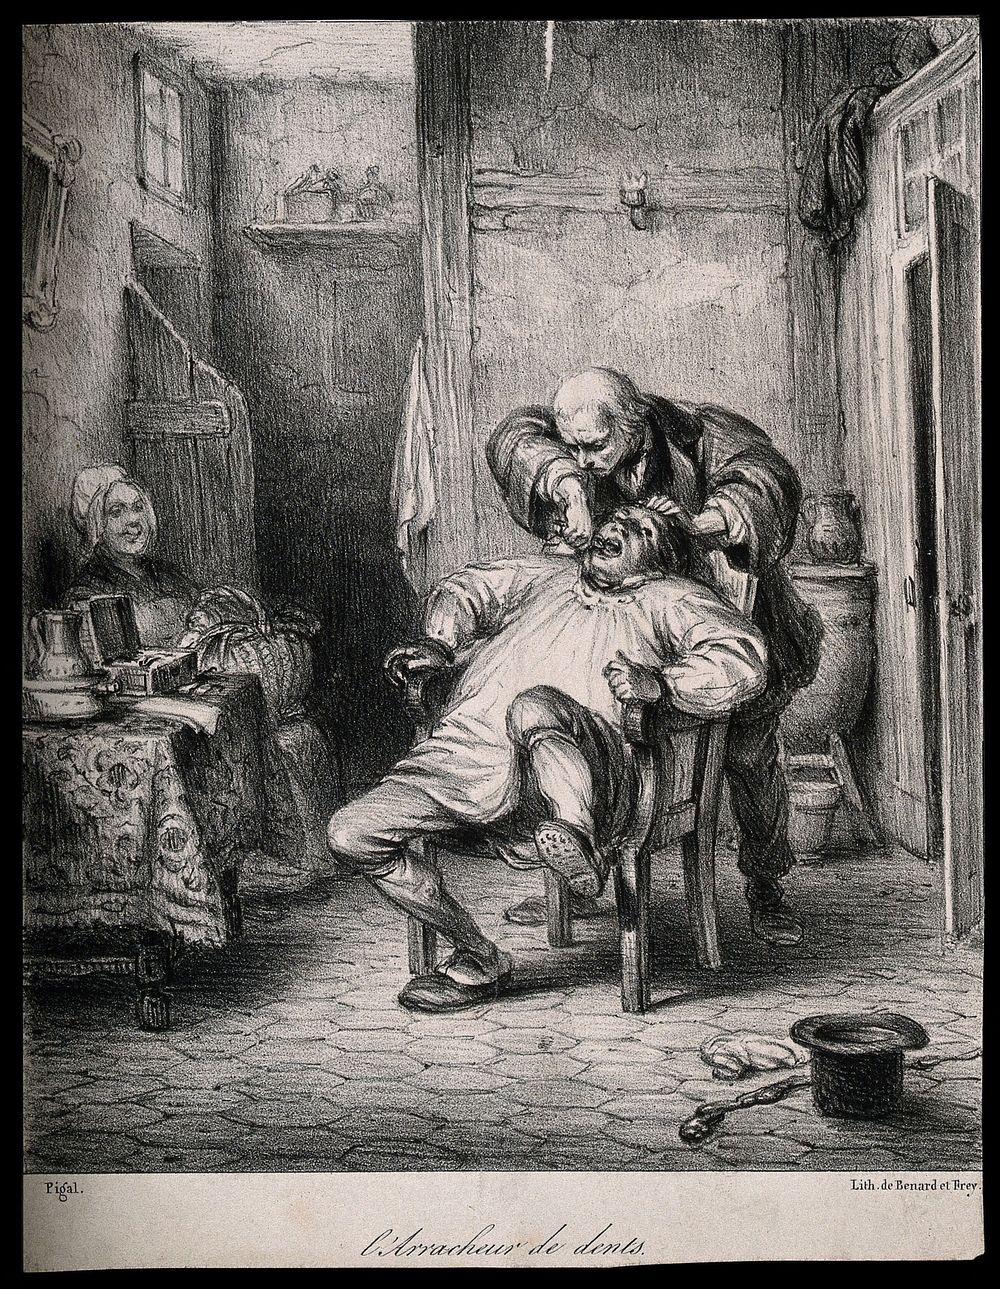 A rural tooth-drawer in his surgery extracting a tooth from a patient. Lithograph by E. Pigal.